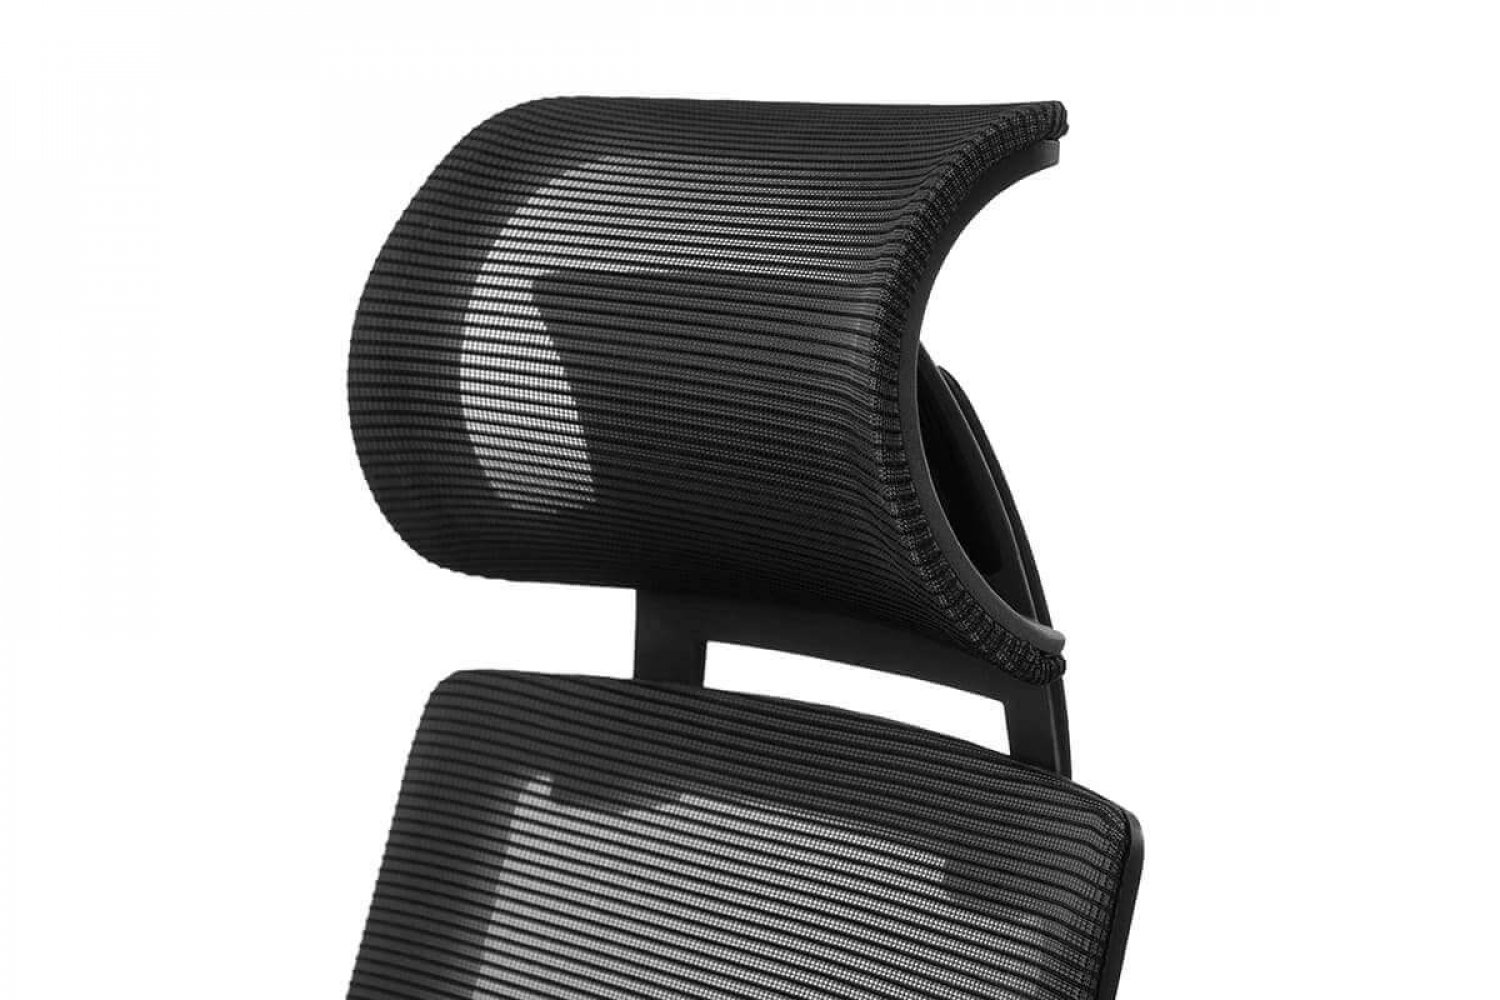 Adaptic COMFORT - Comfortable therapeutic office chair for medium and large build for healthy back